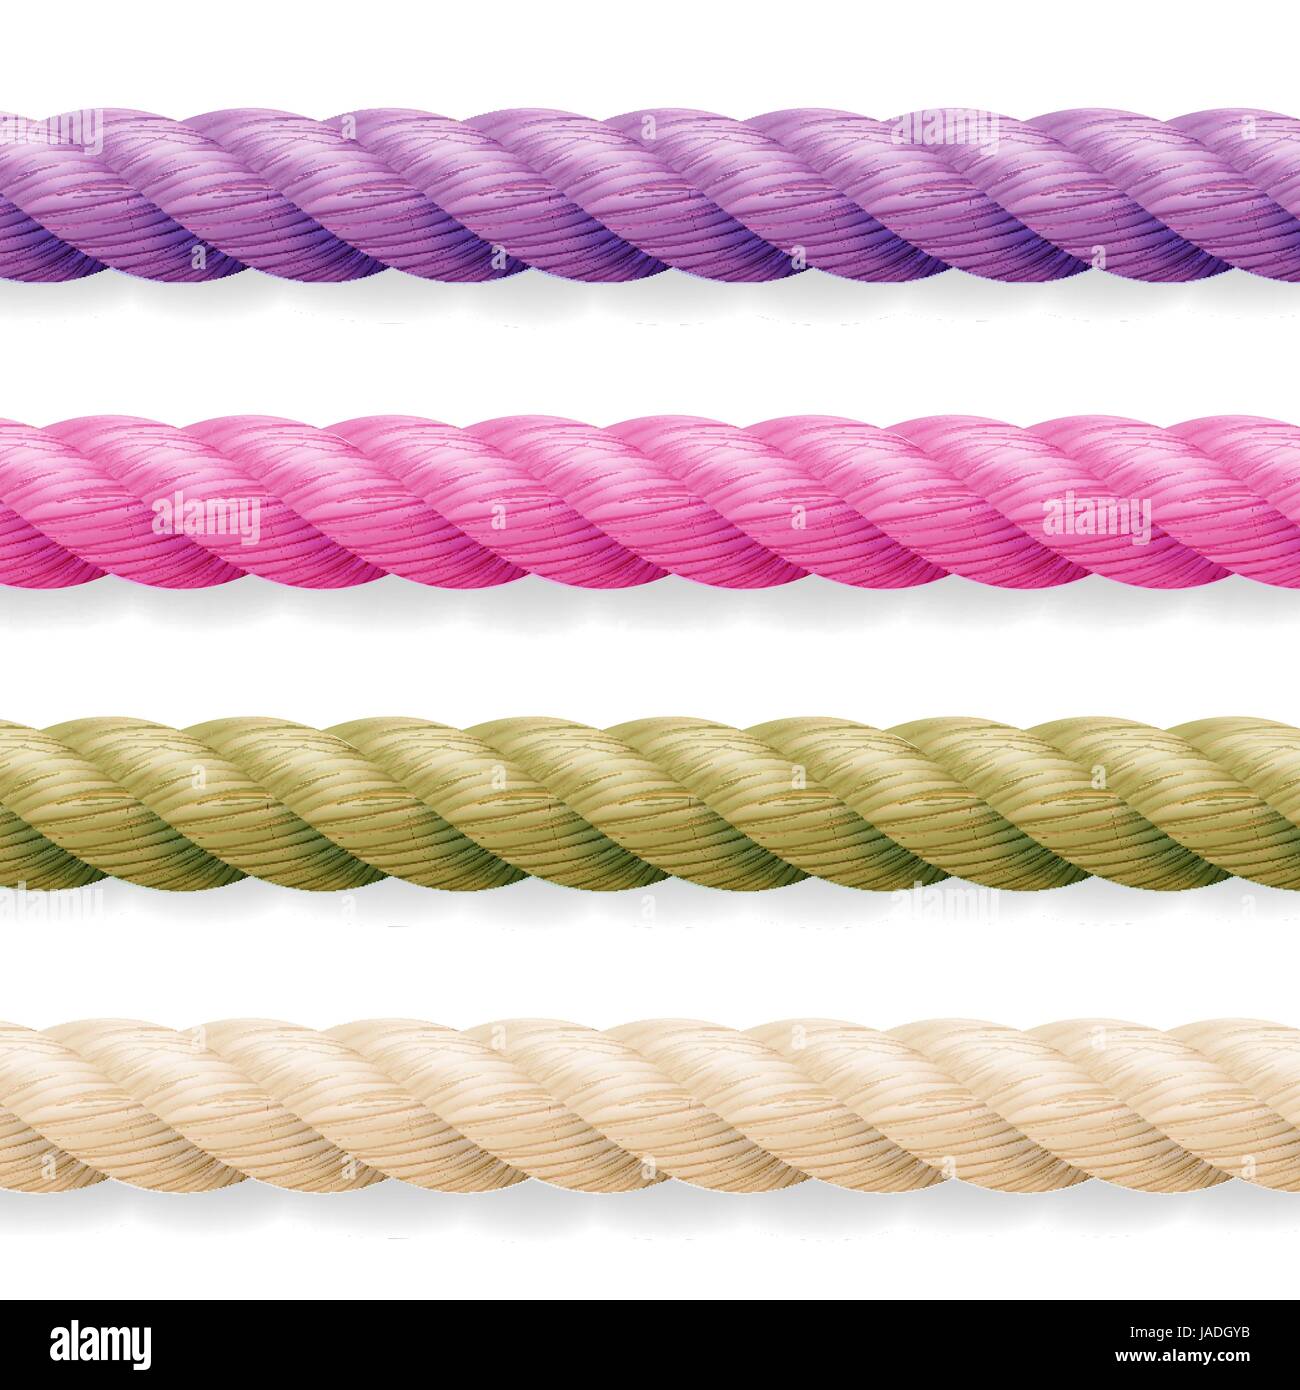 28,522 Rope Thin Images, Stock Photos, 3D objects, & Vectors